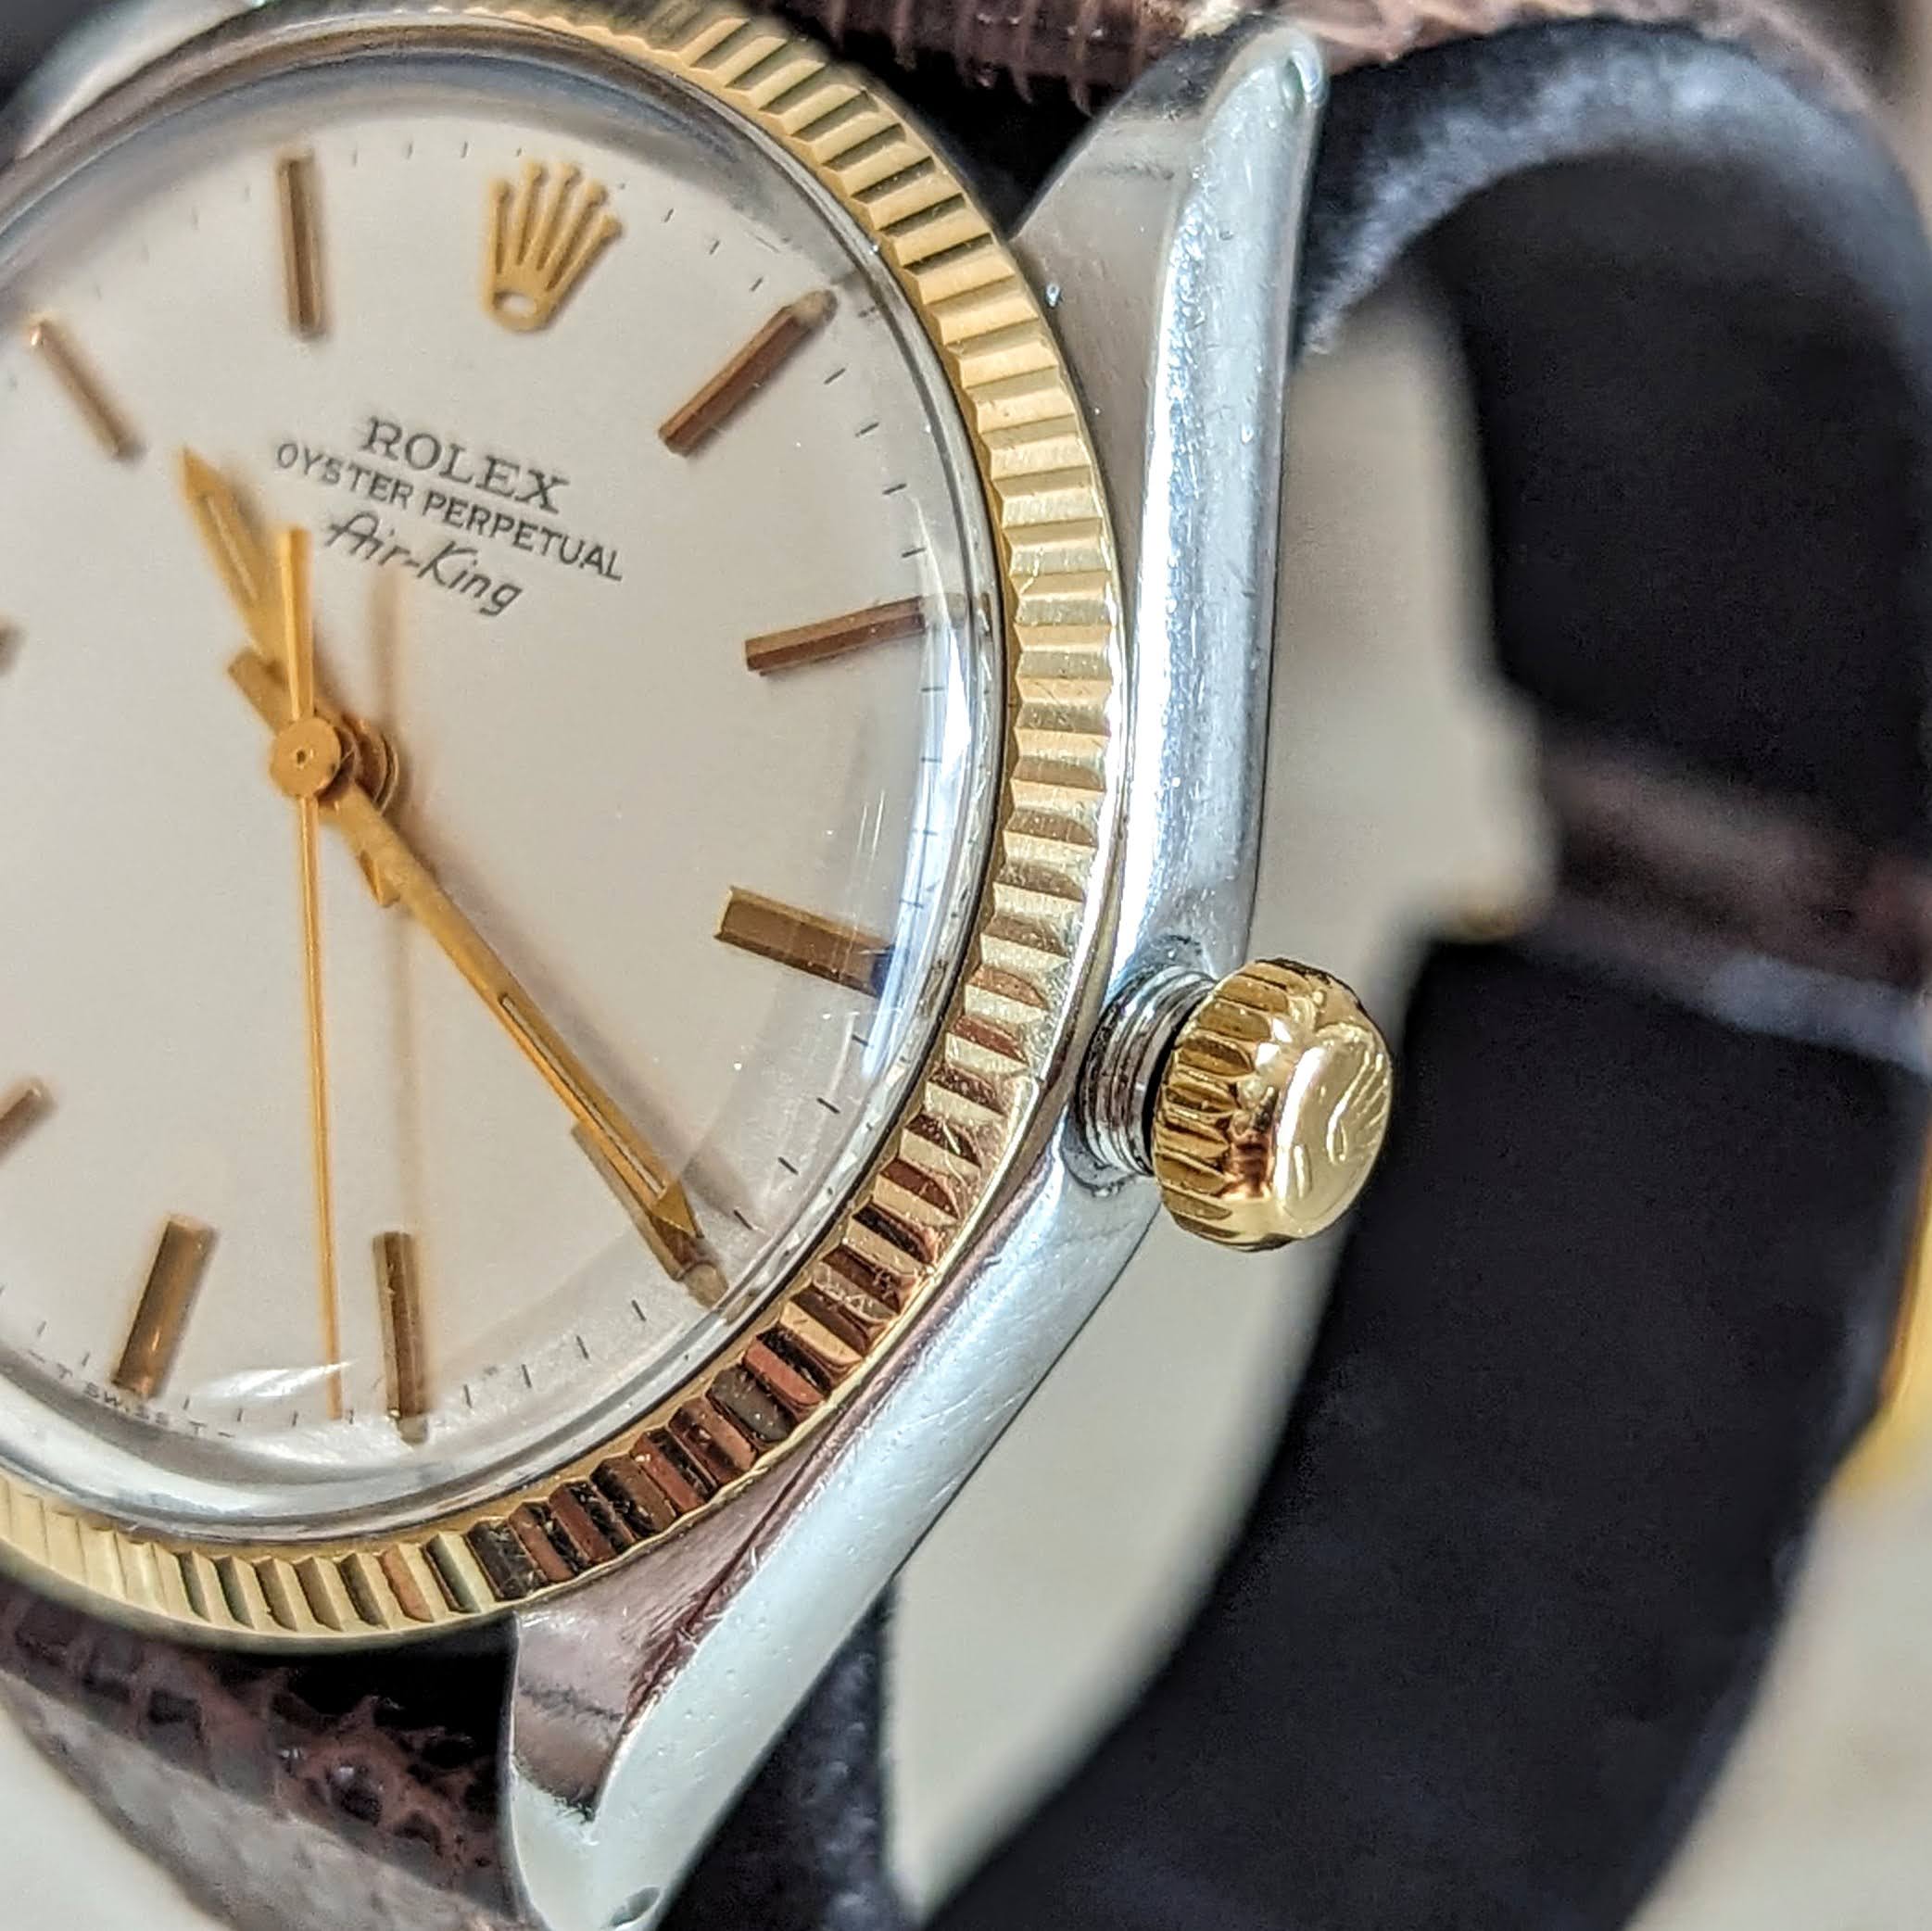 1970 ROLEX Oyster Perpetual AIR-KING Watch Ref. 5501 Cal. 1520 Vintage Automatic Wristwatch